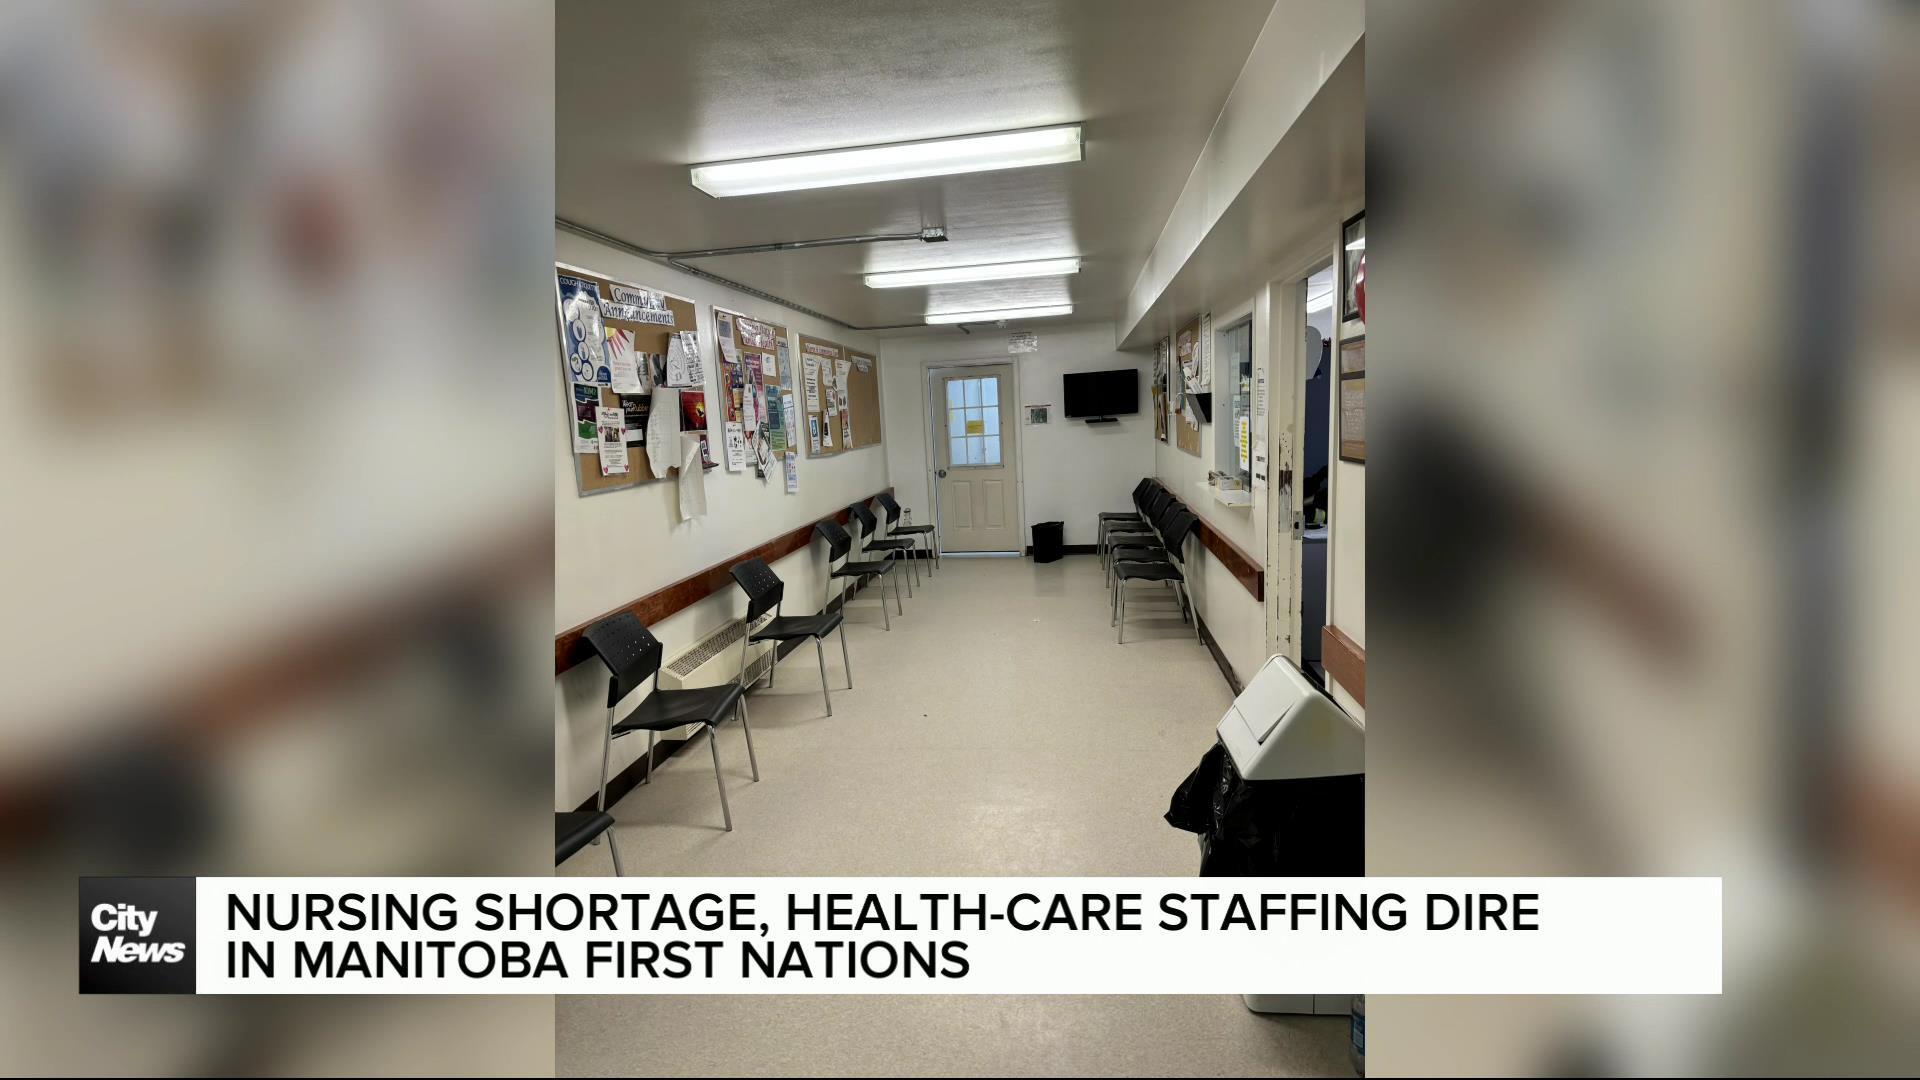 Health care situation dire in Northern Manitoba